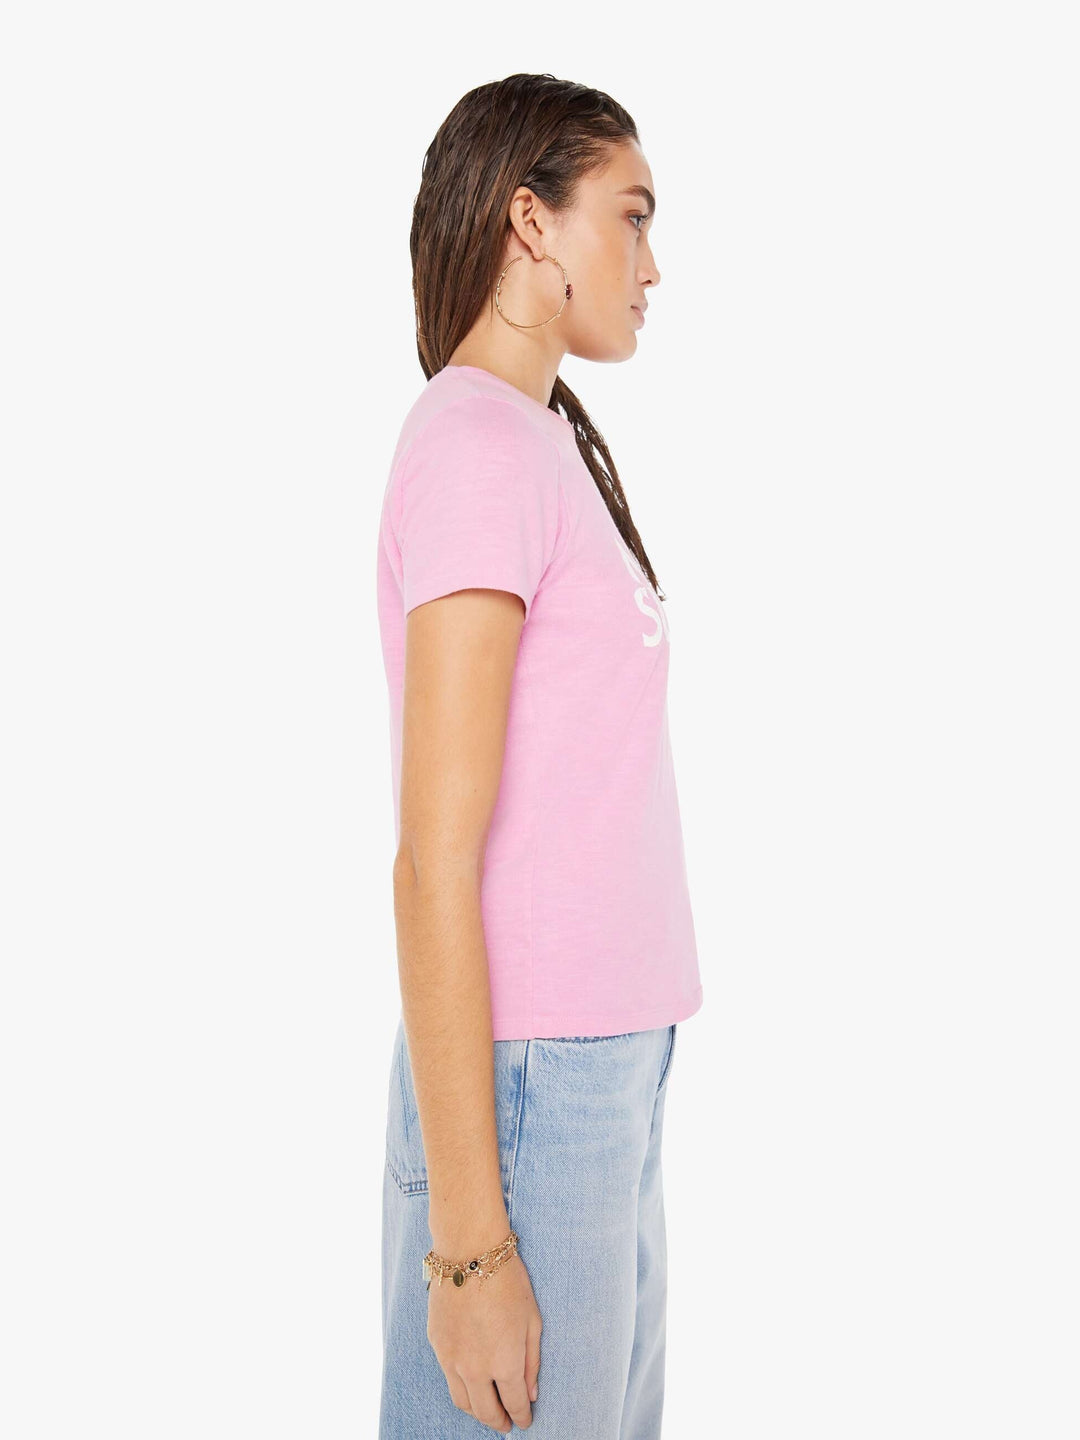 Bubblegum Pink Mother Superior Lil Sinful Tee